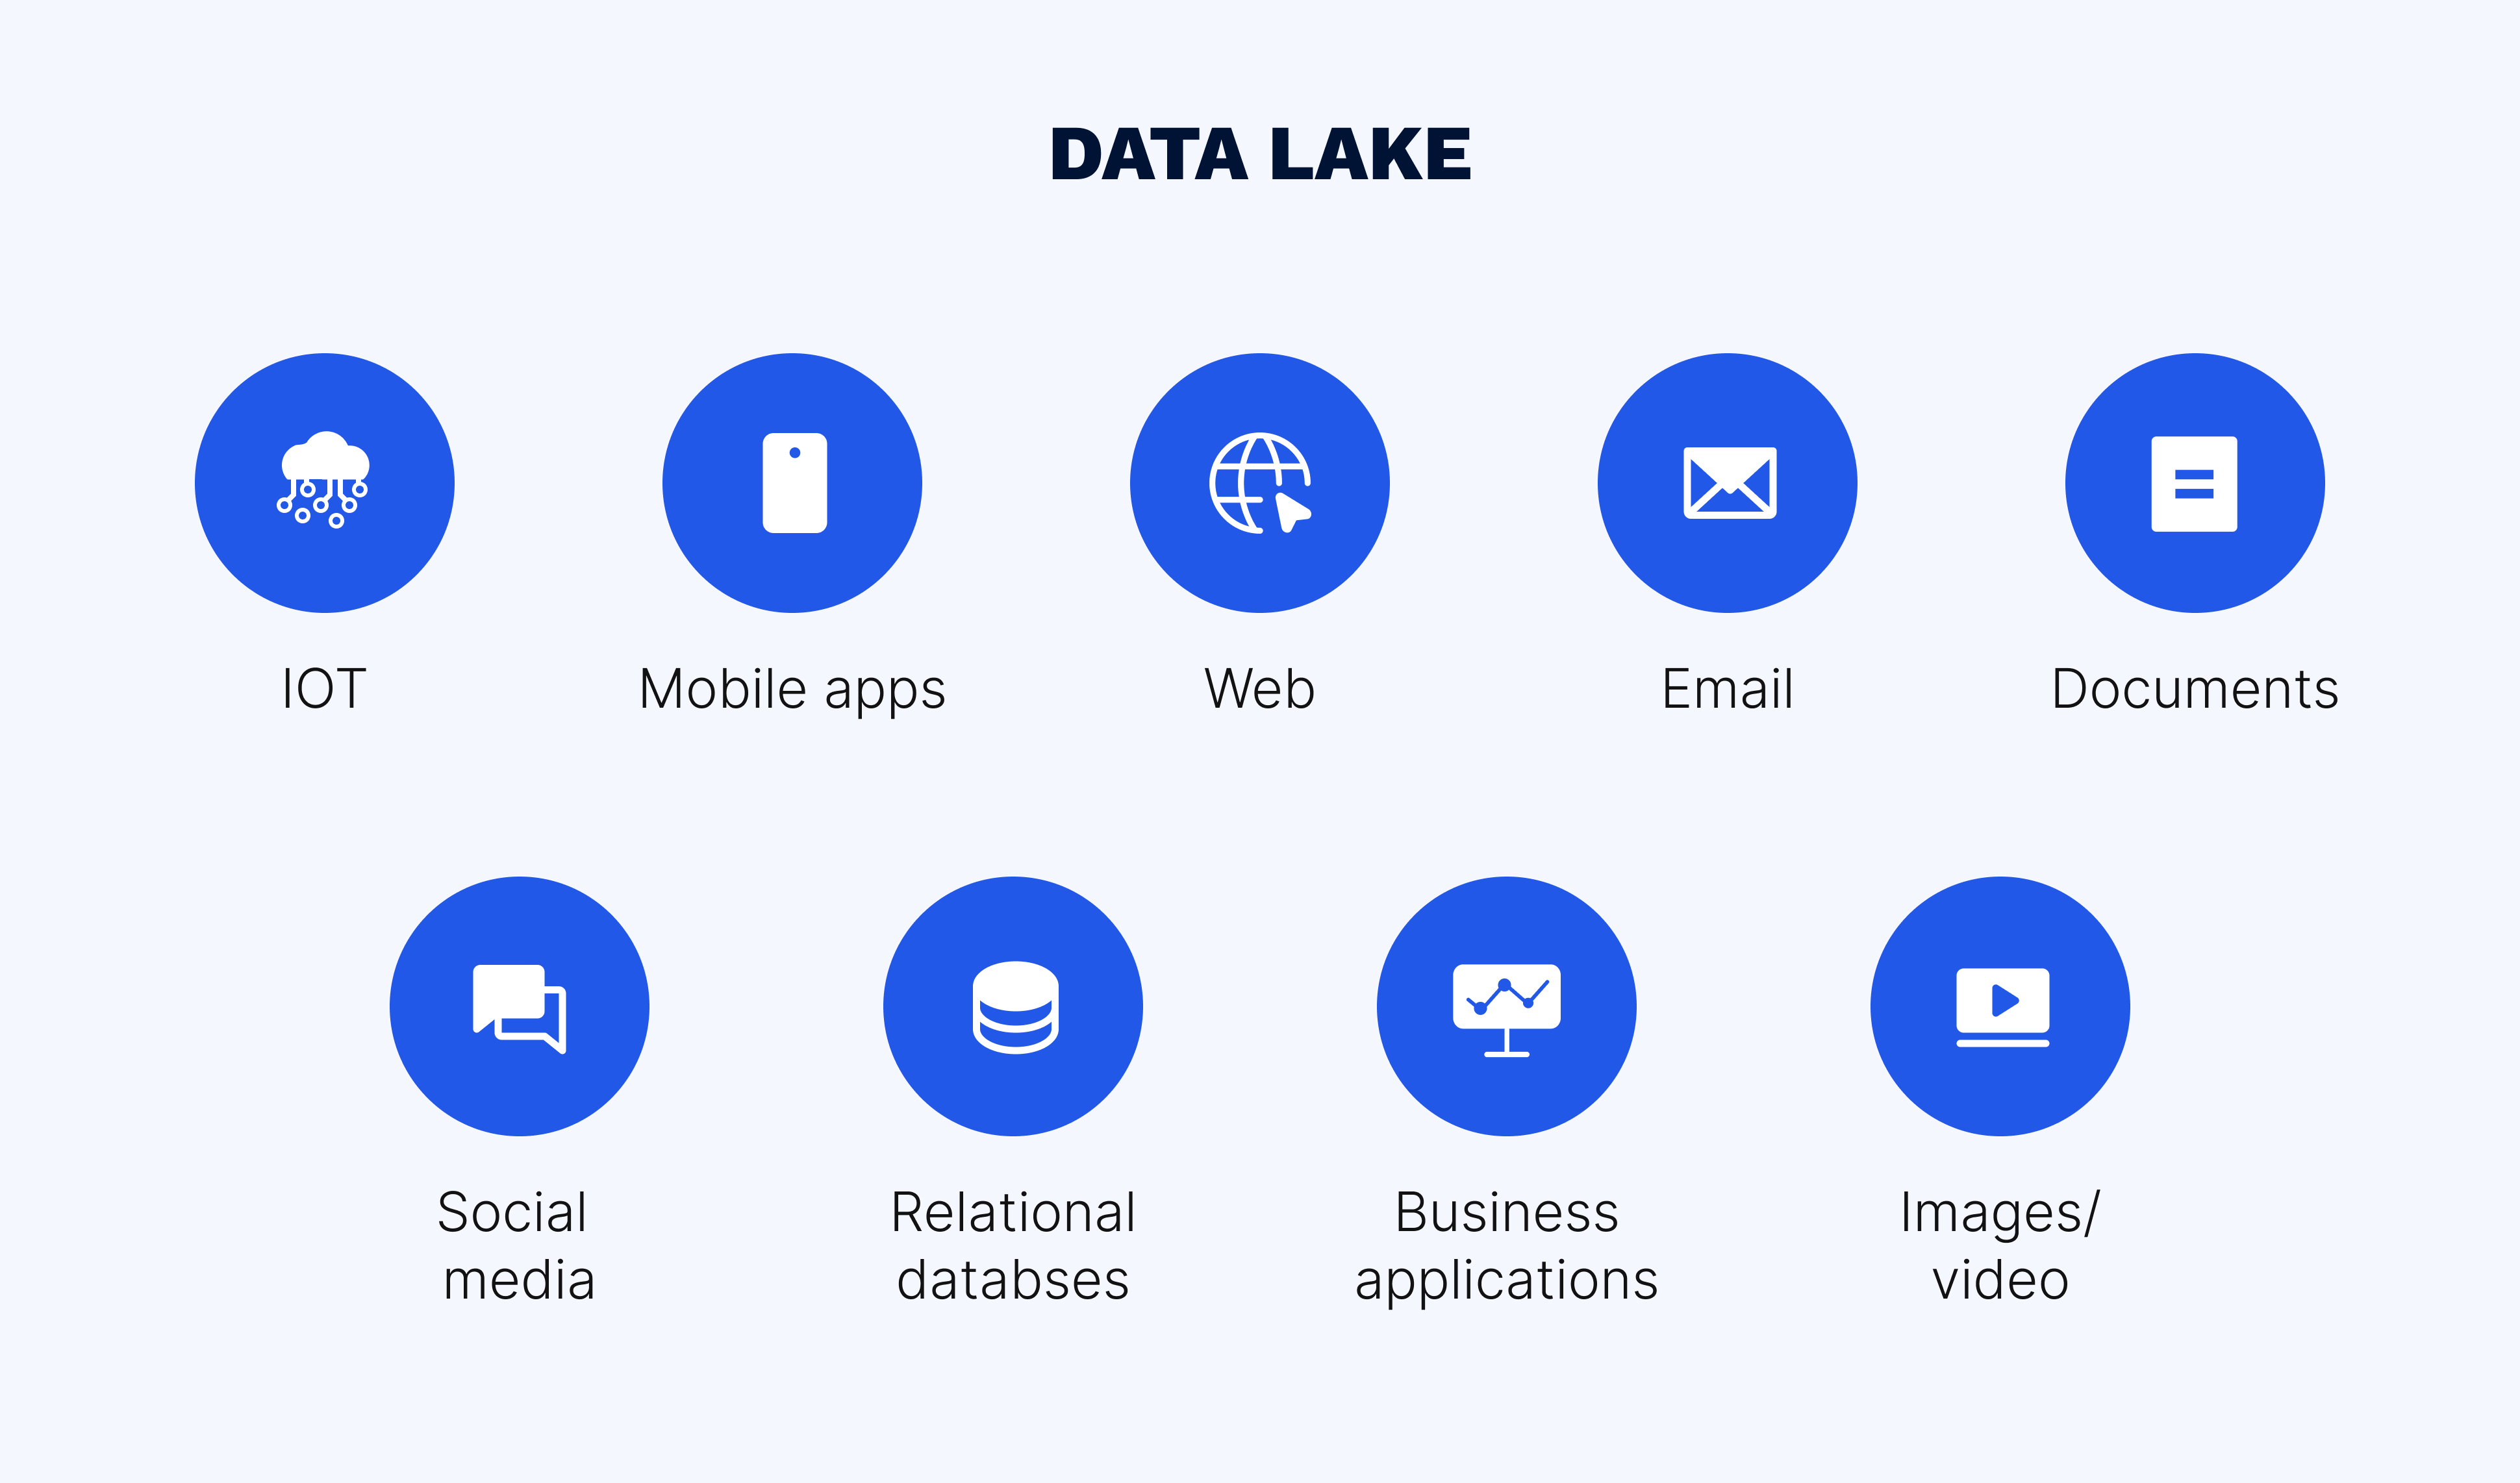 Application of data lake technology in various industries